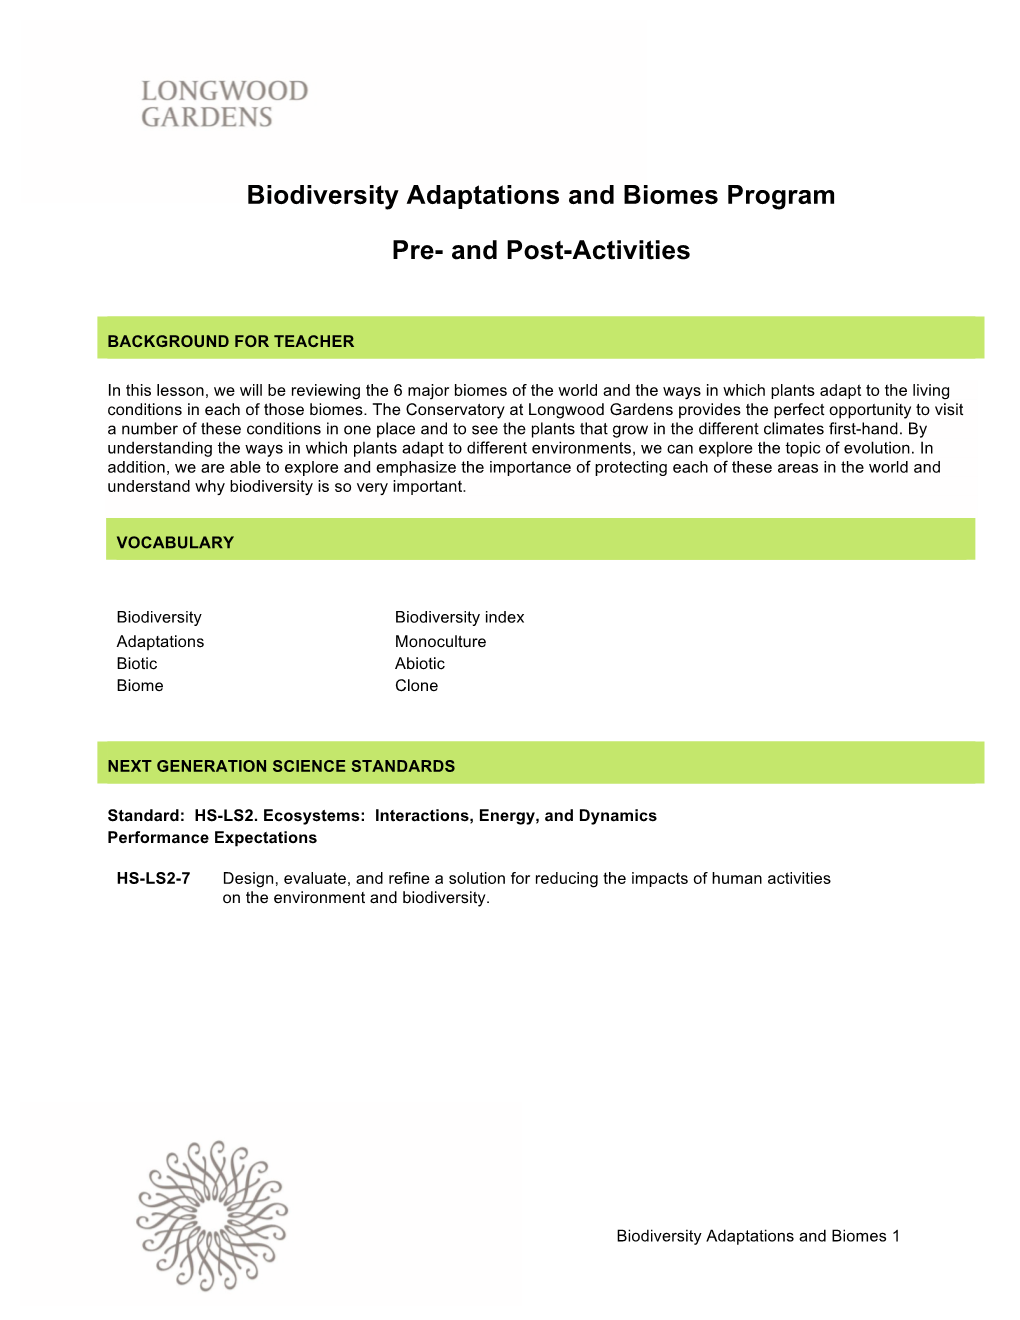 Biodiversity Adaptations and Biomes Program Pre- and Post-Activities